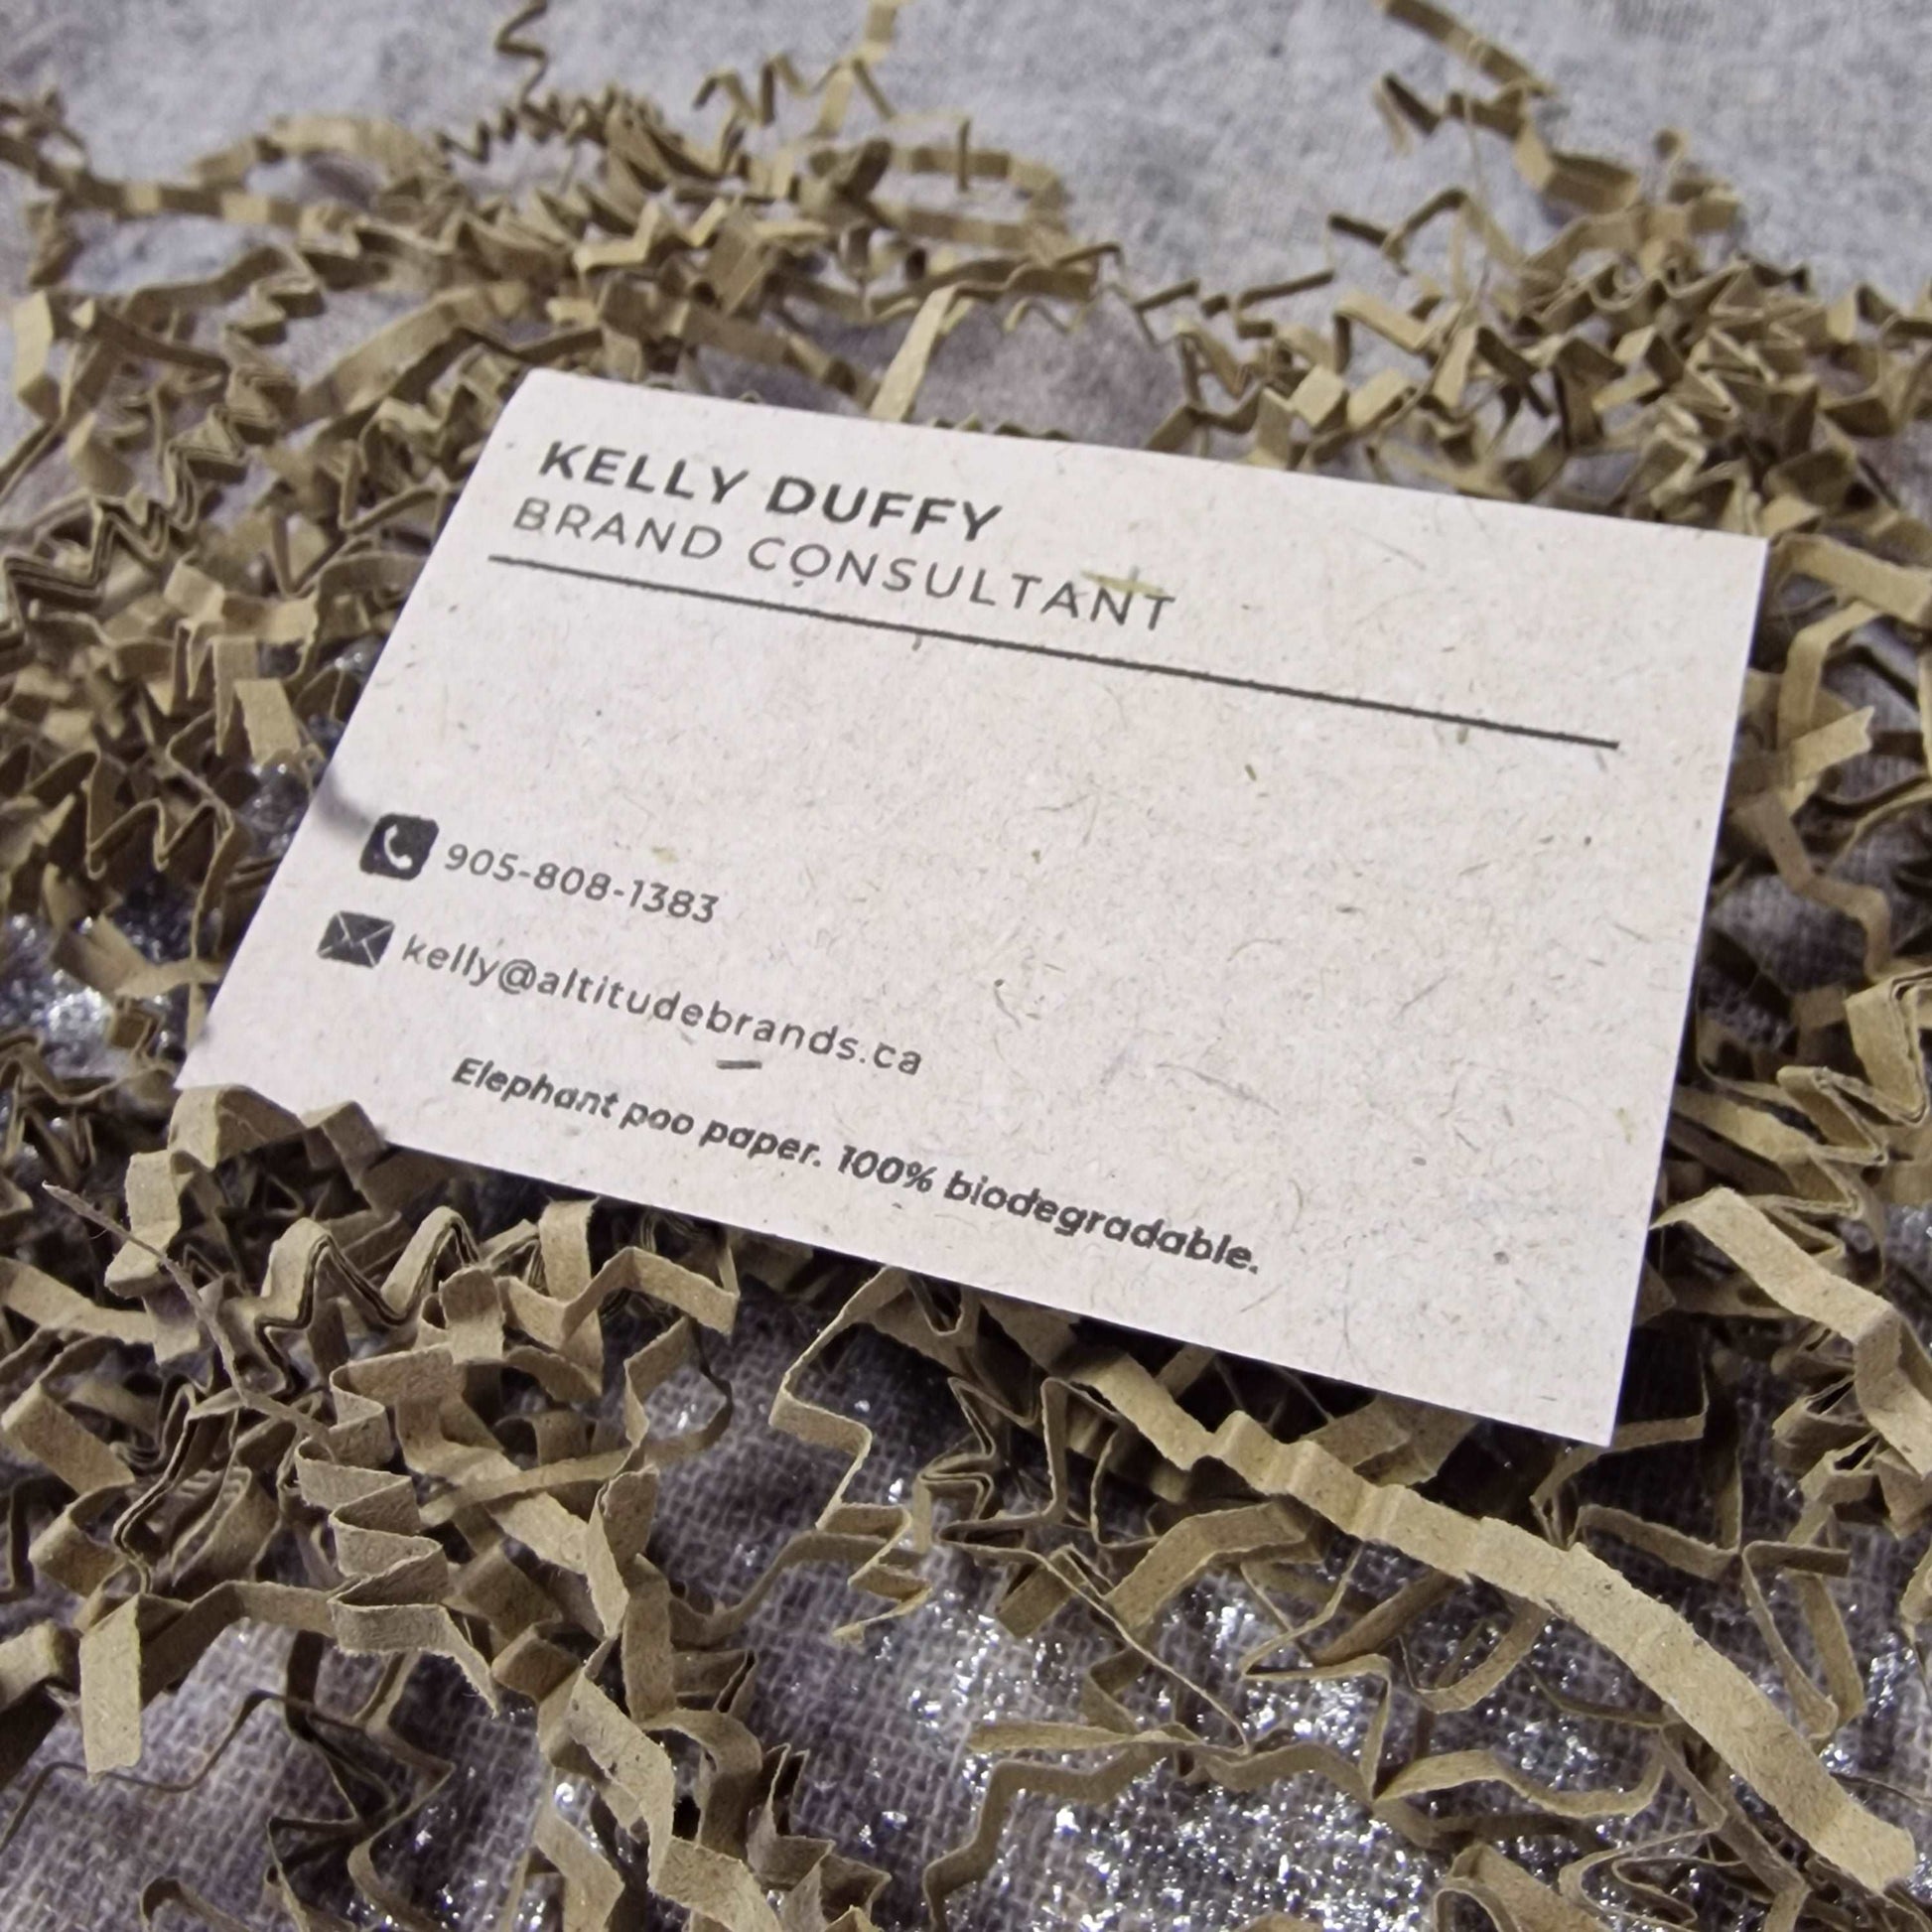 Plantable Seed Paper Business Cards - Custom  Little Green Paper Shop